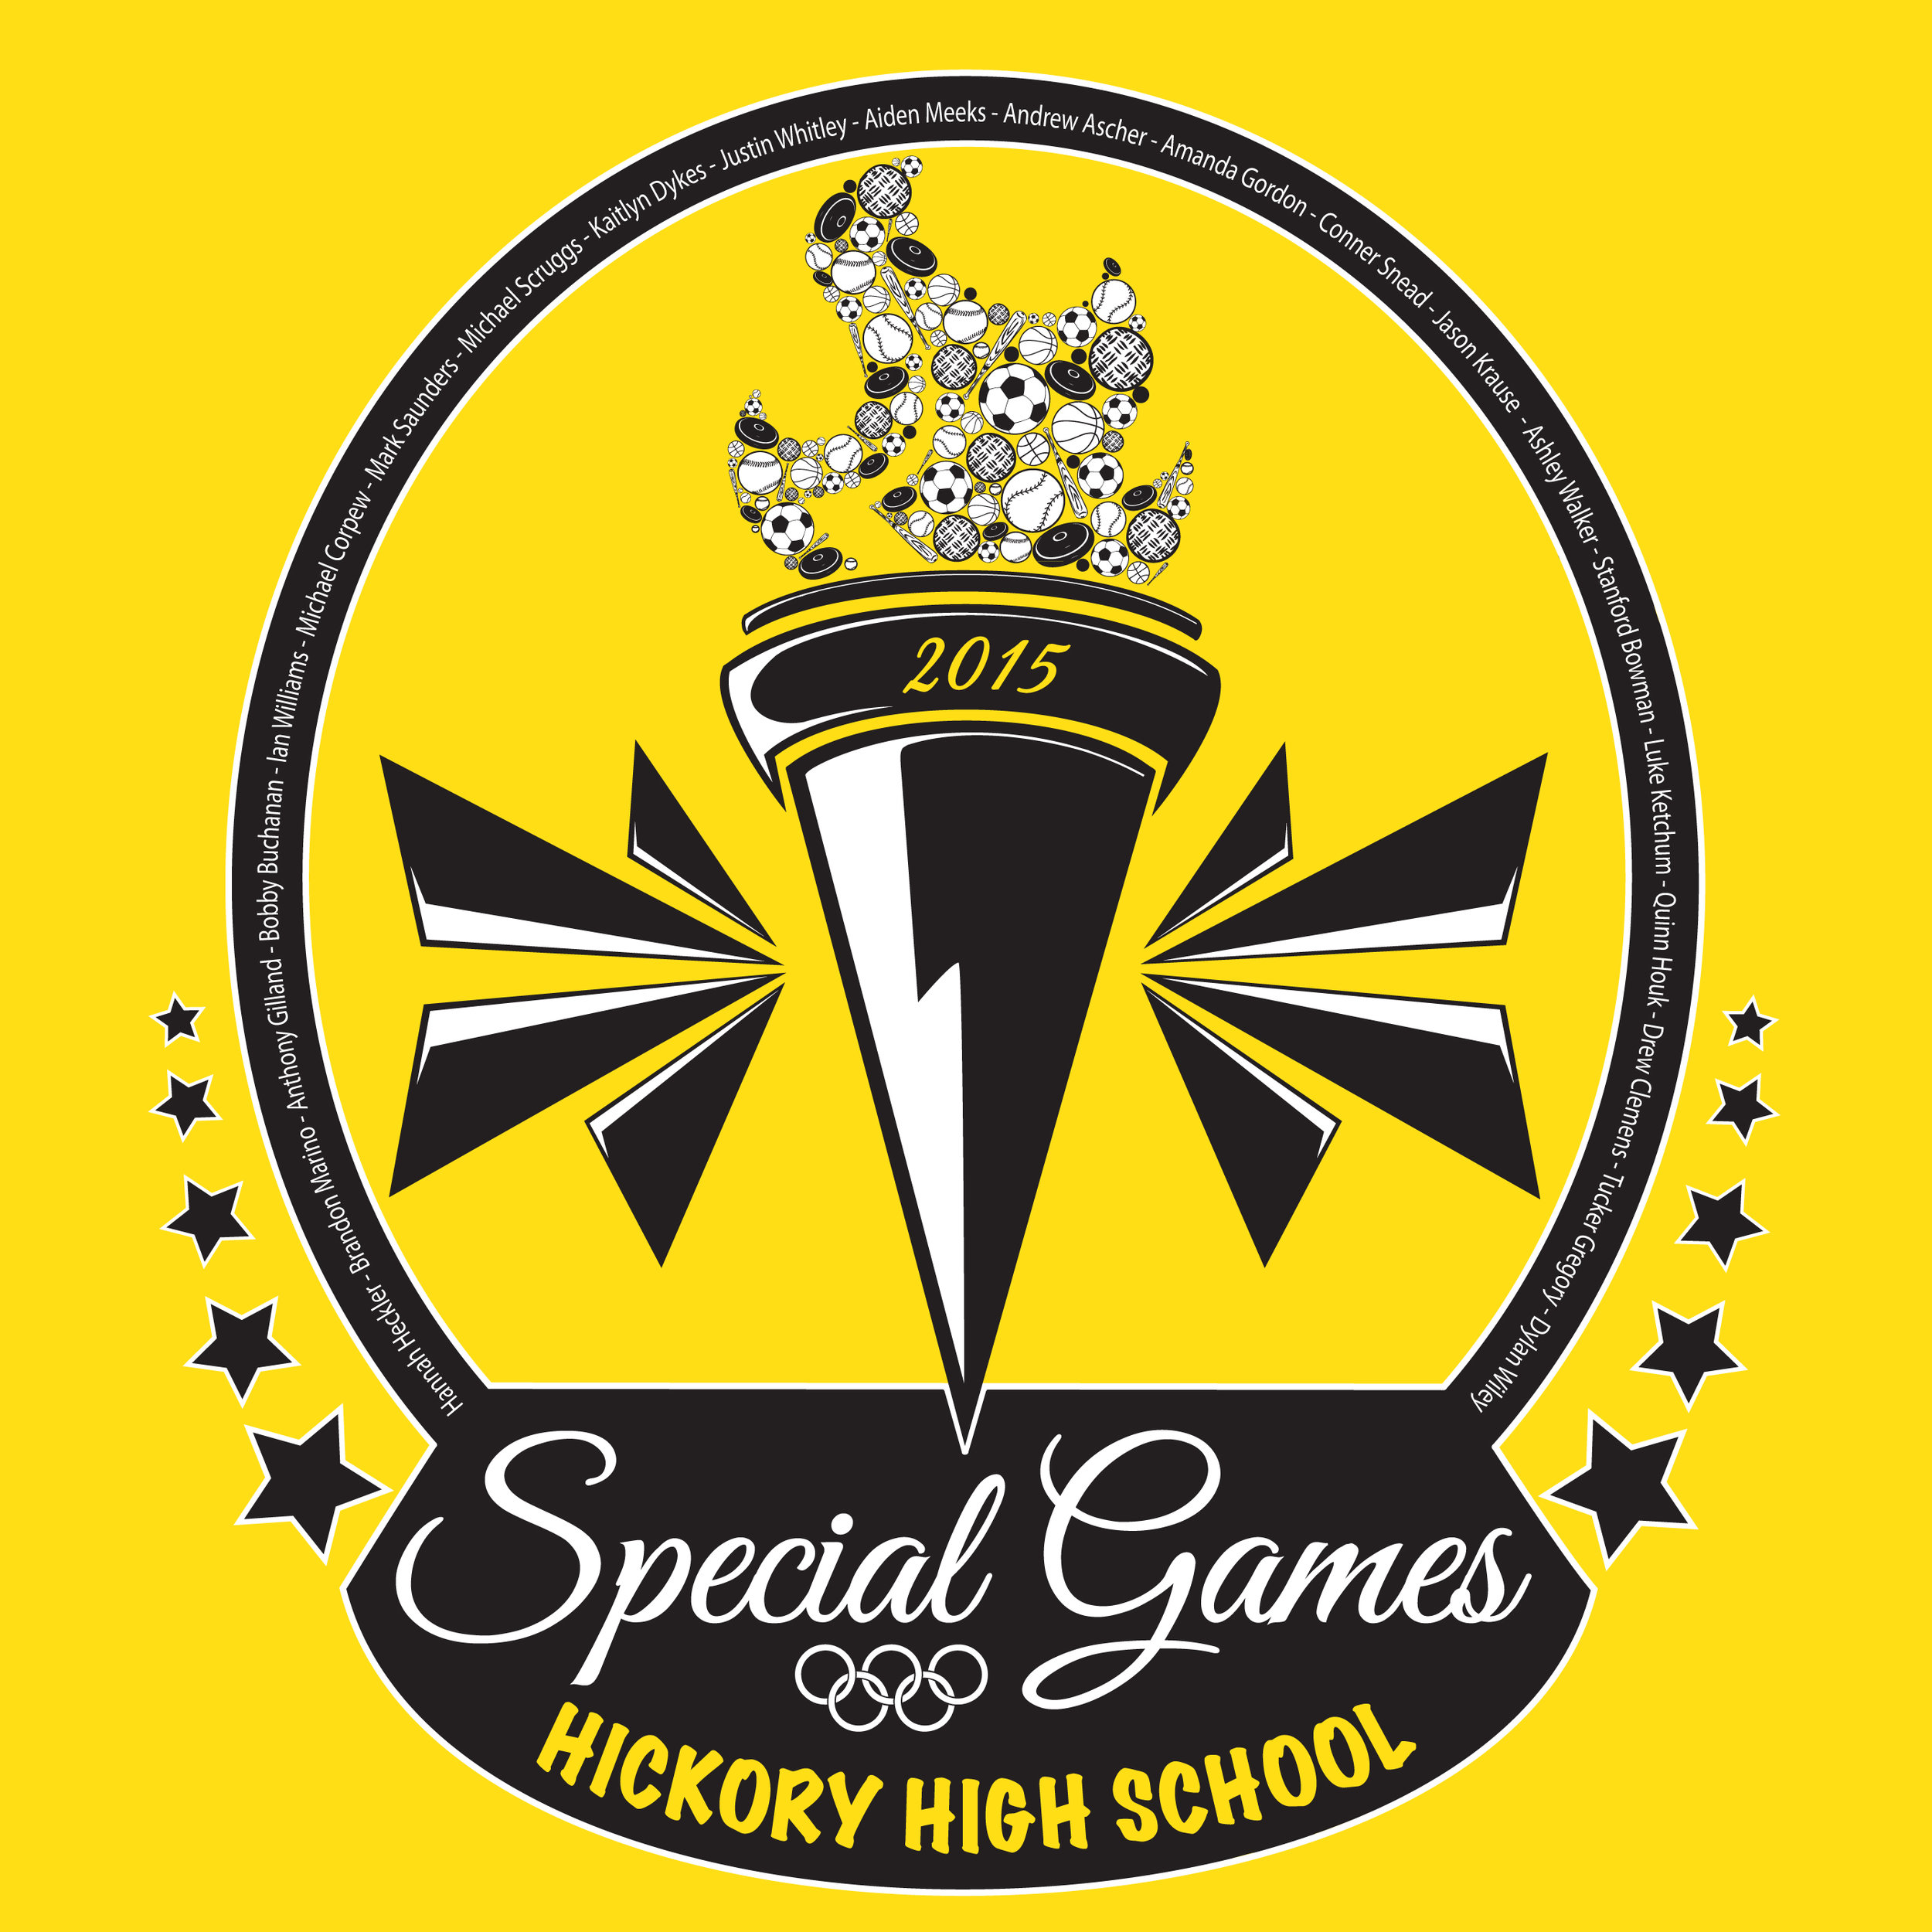 Special Games 2015